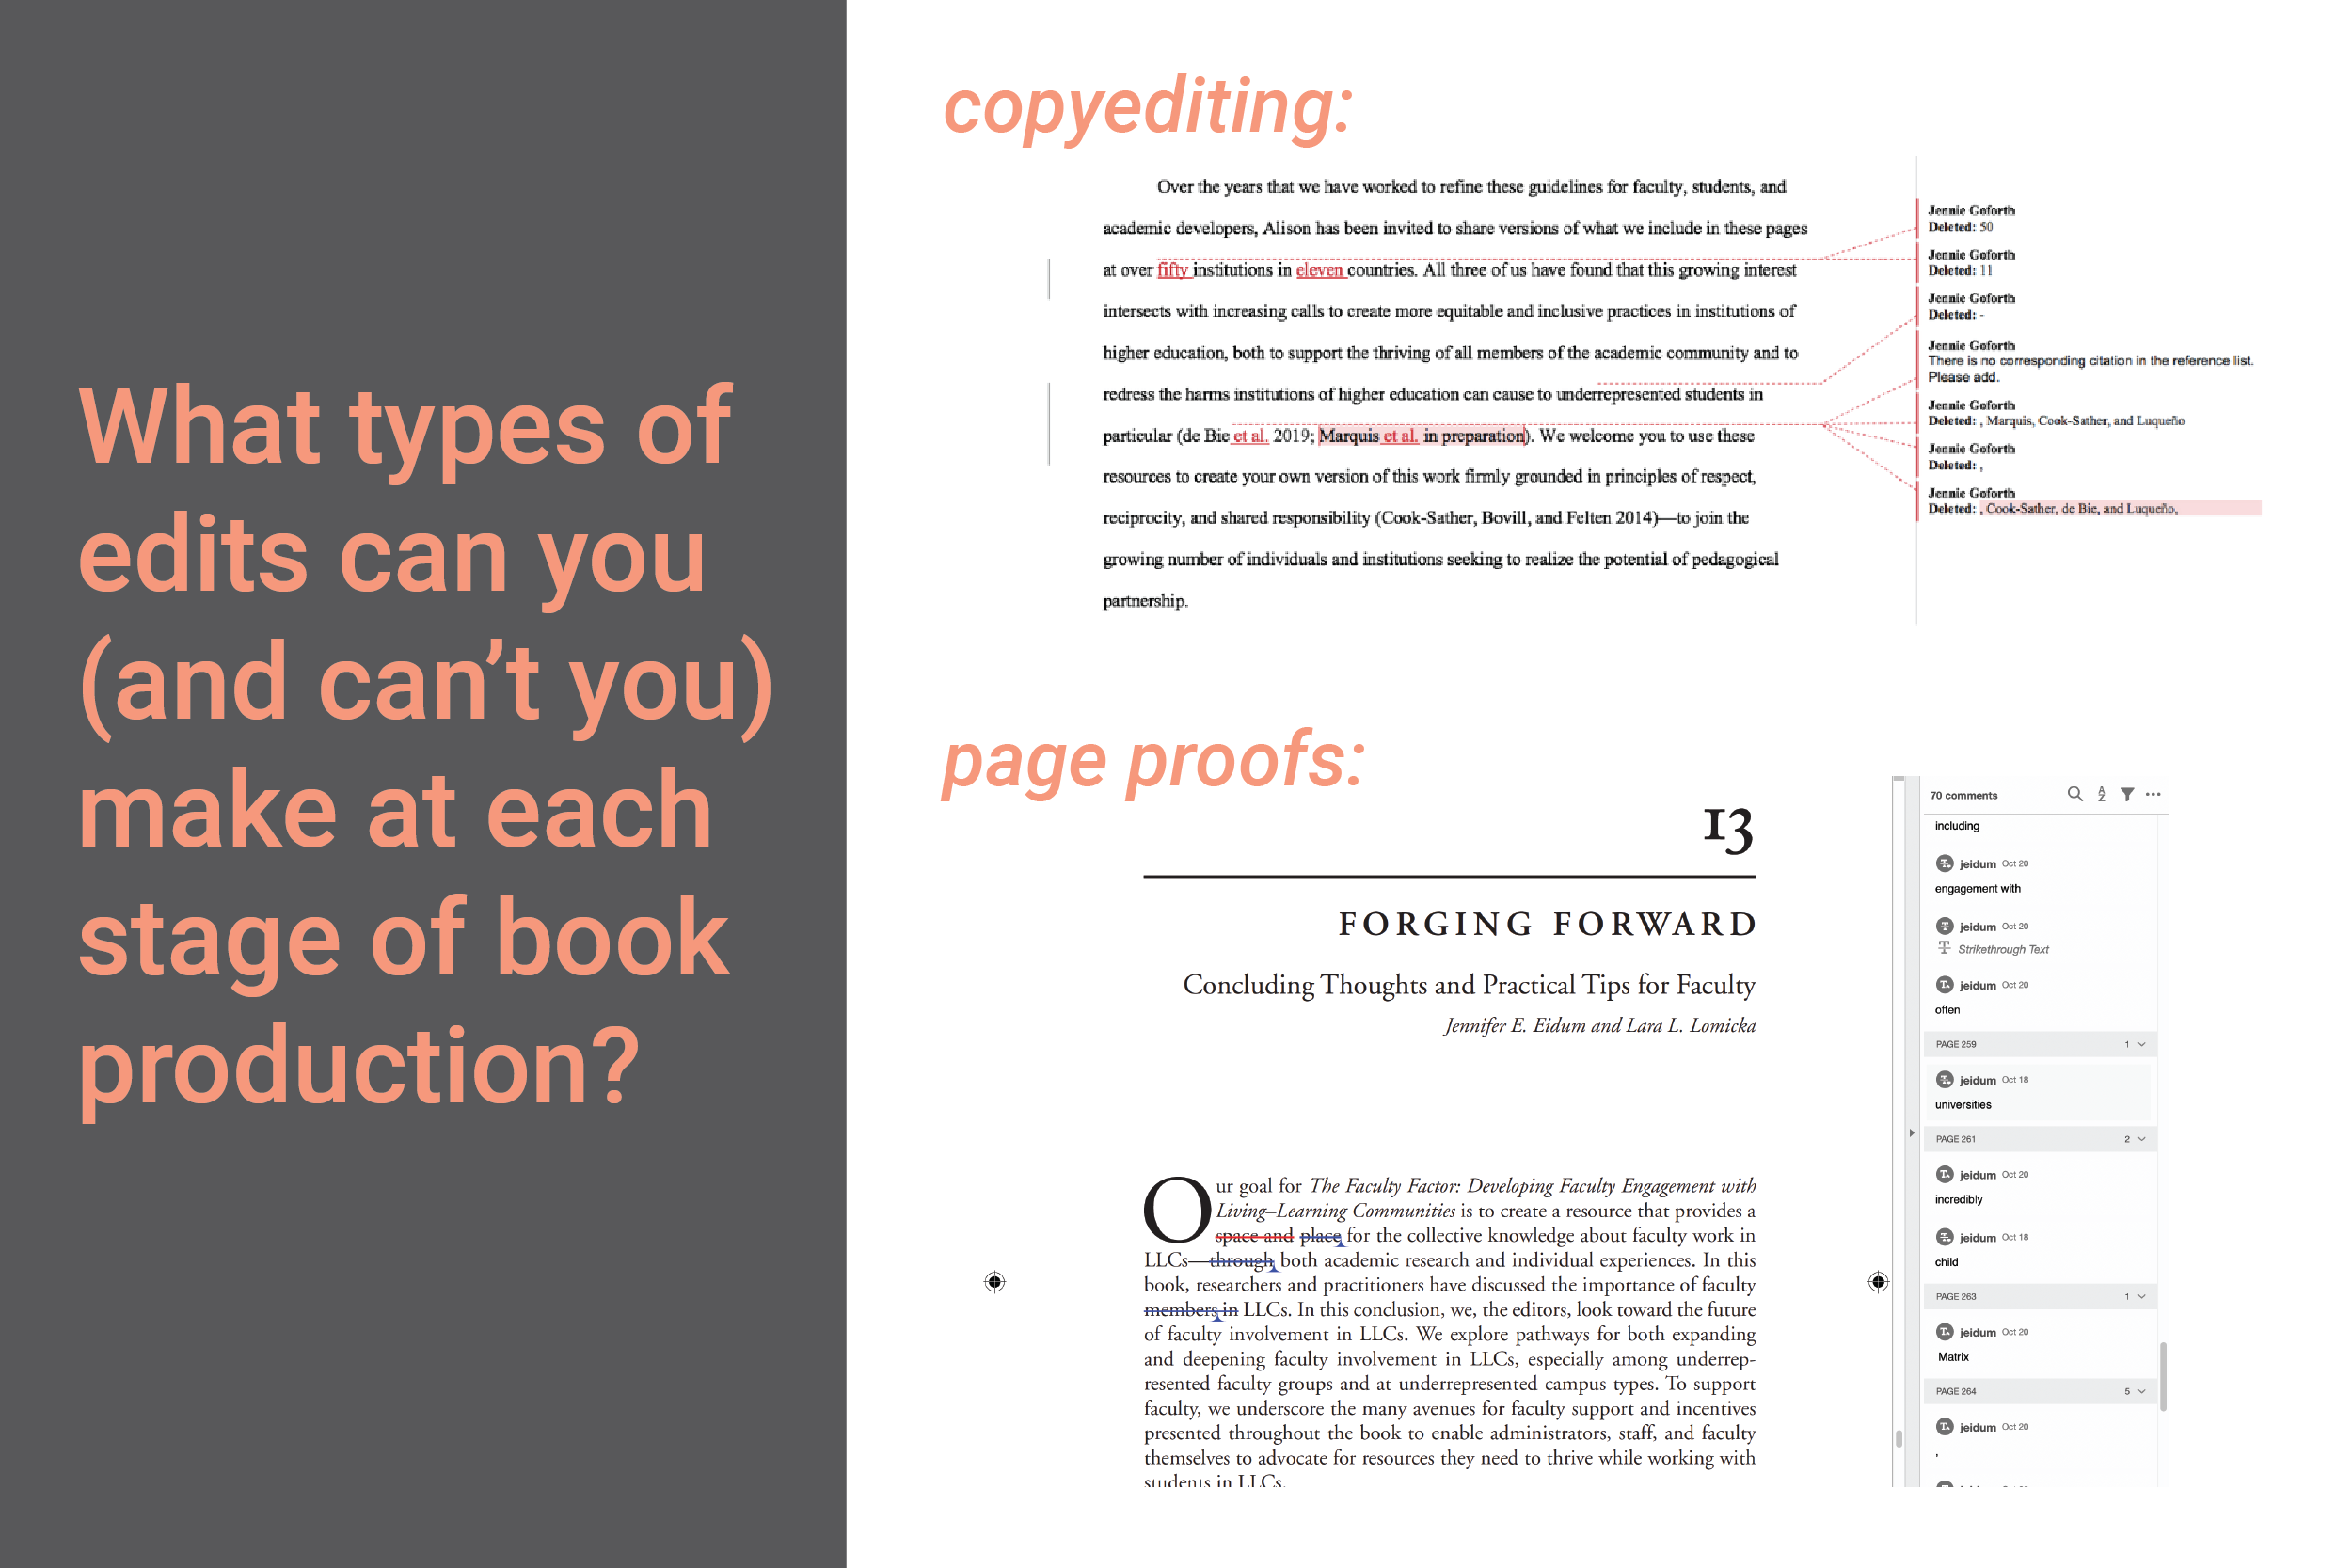 "What types of edits can you (and can't you) make at each stage of book production?" On the right, there are two screenshots: on top is a Word document showing edits made with Track Changes (copyediting) and below is a PDF of a book page in Adobe Acrobat with edits and comments showing (page proofs).